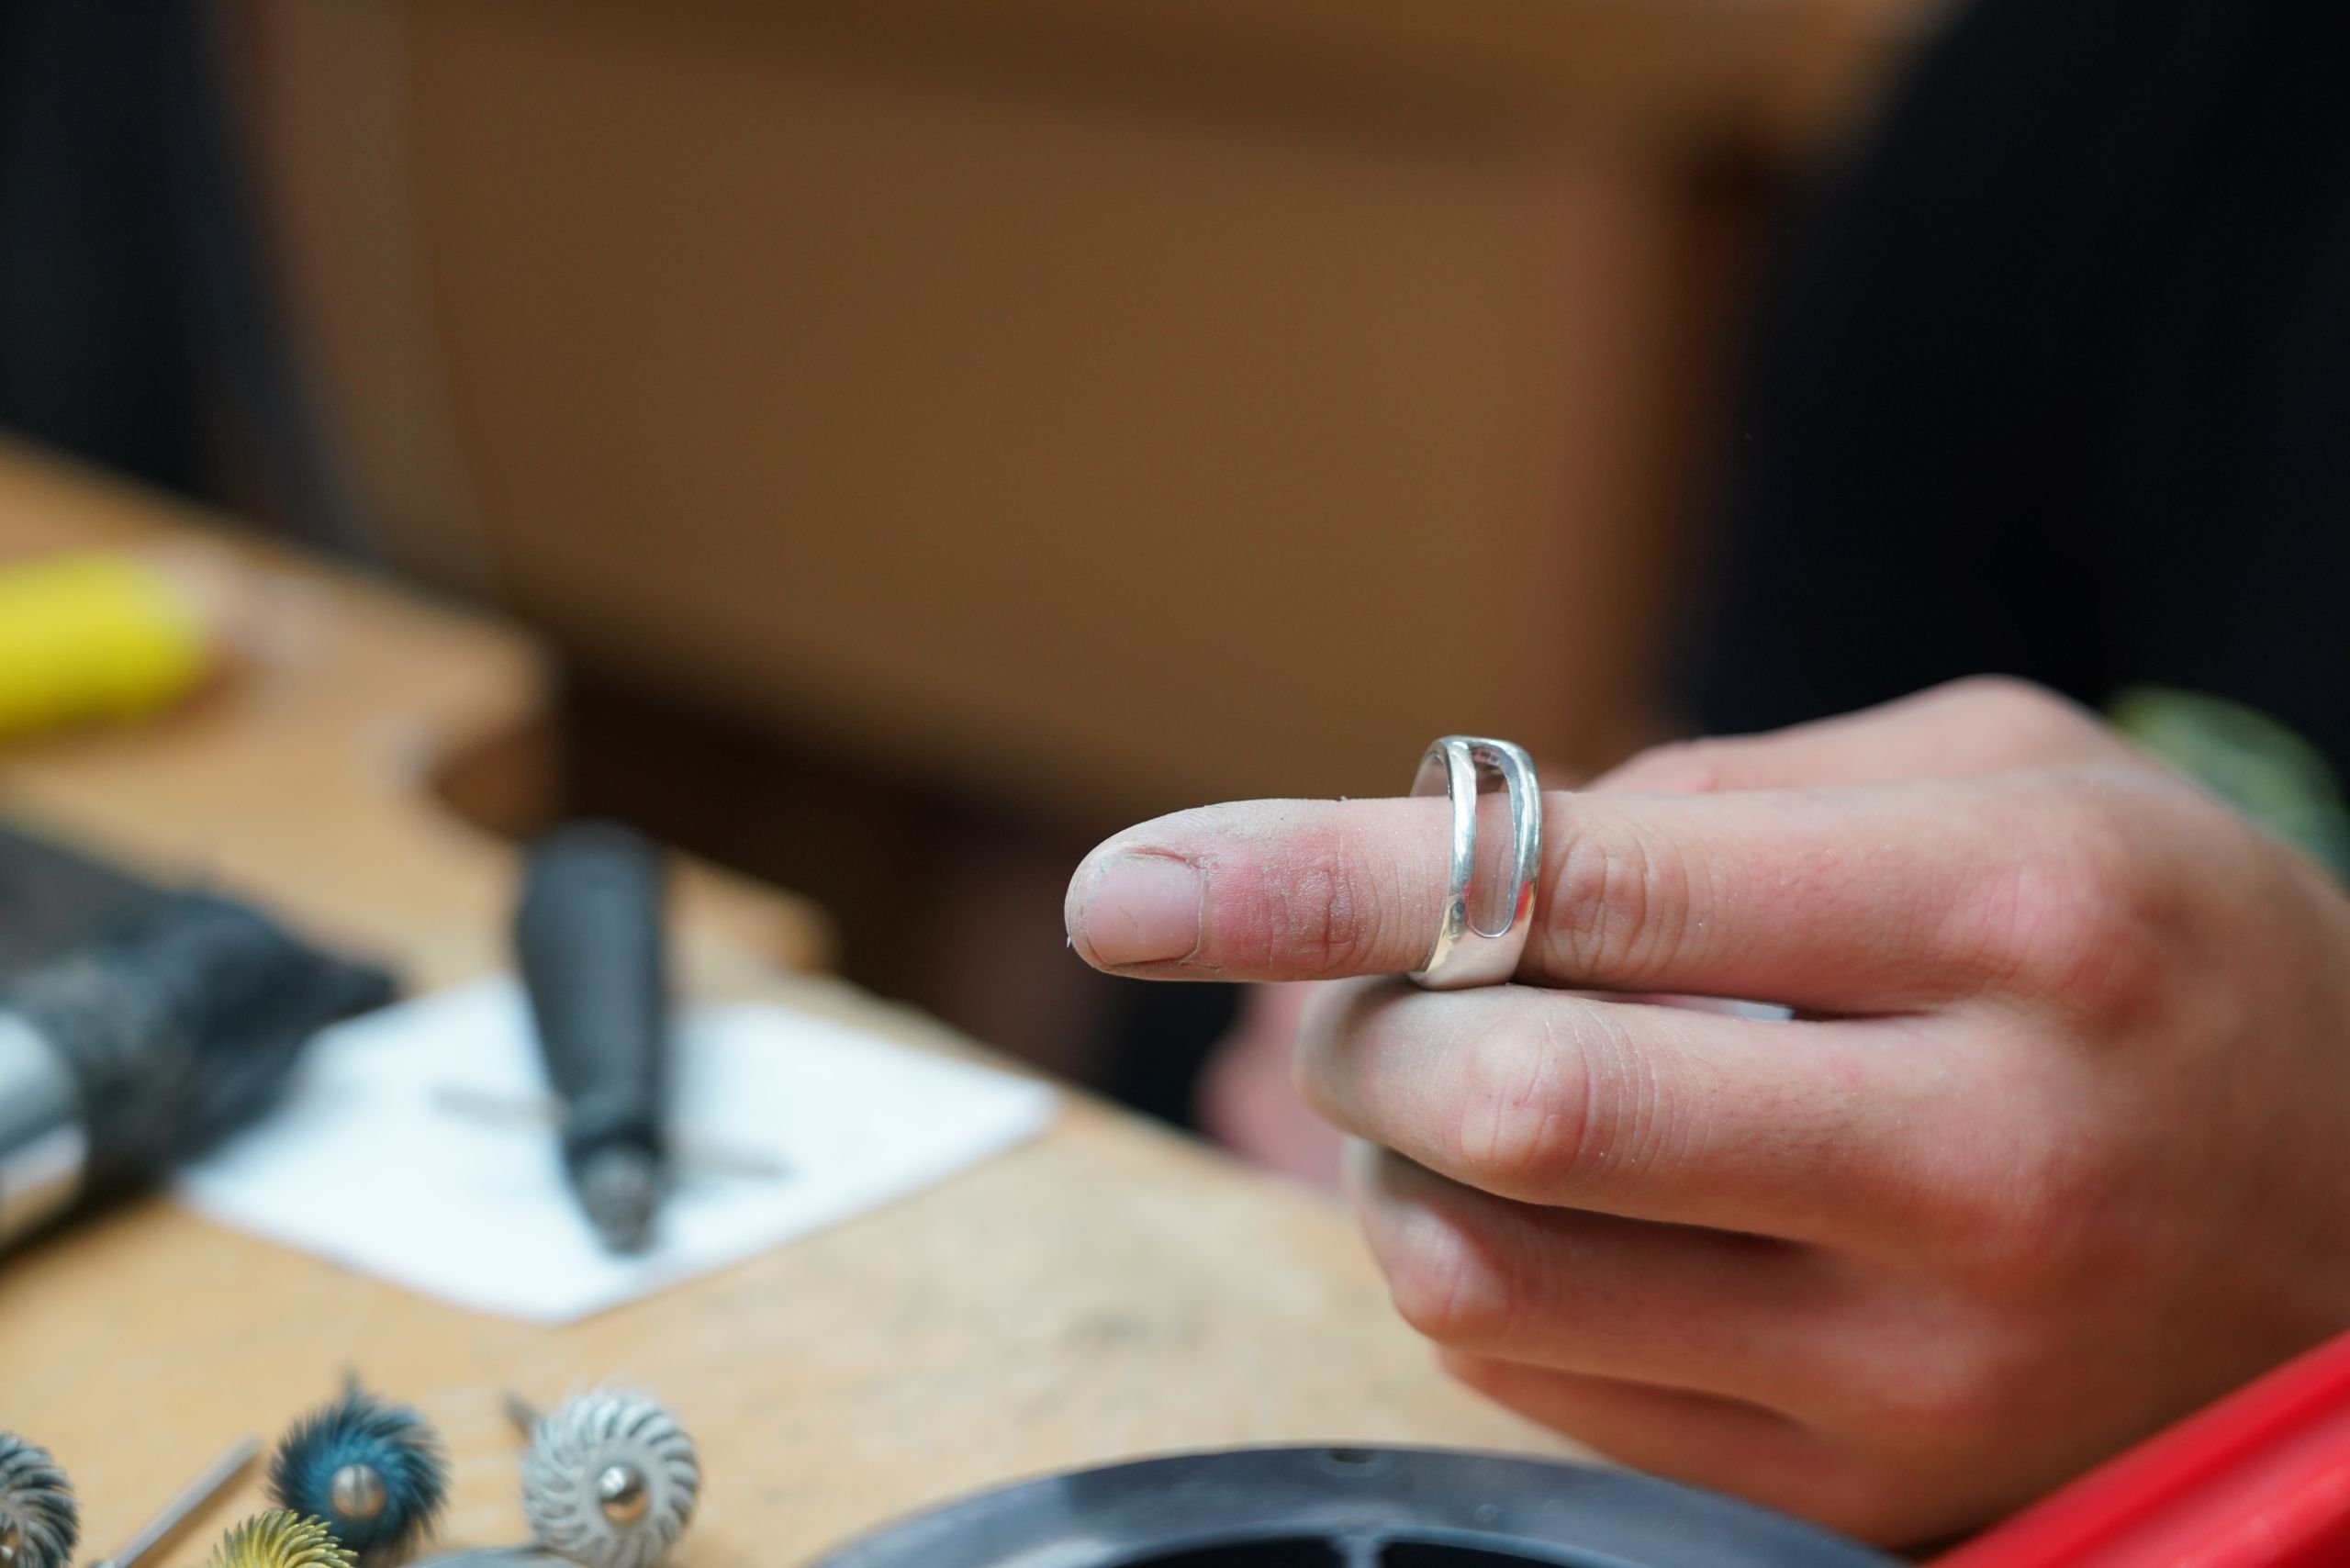 Making Rings: A resource page on studio techniques and required